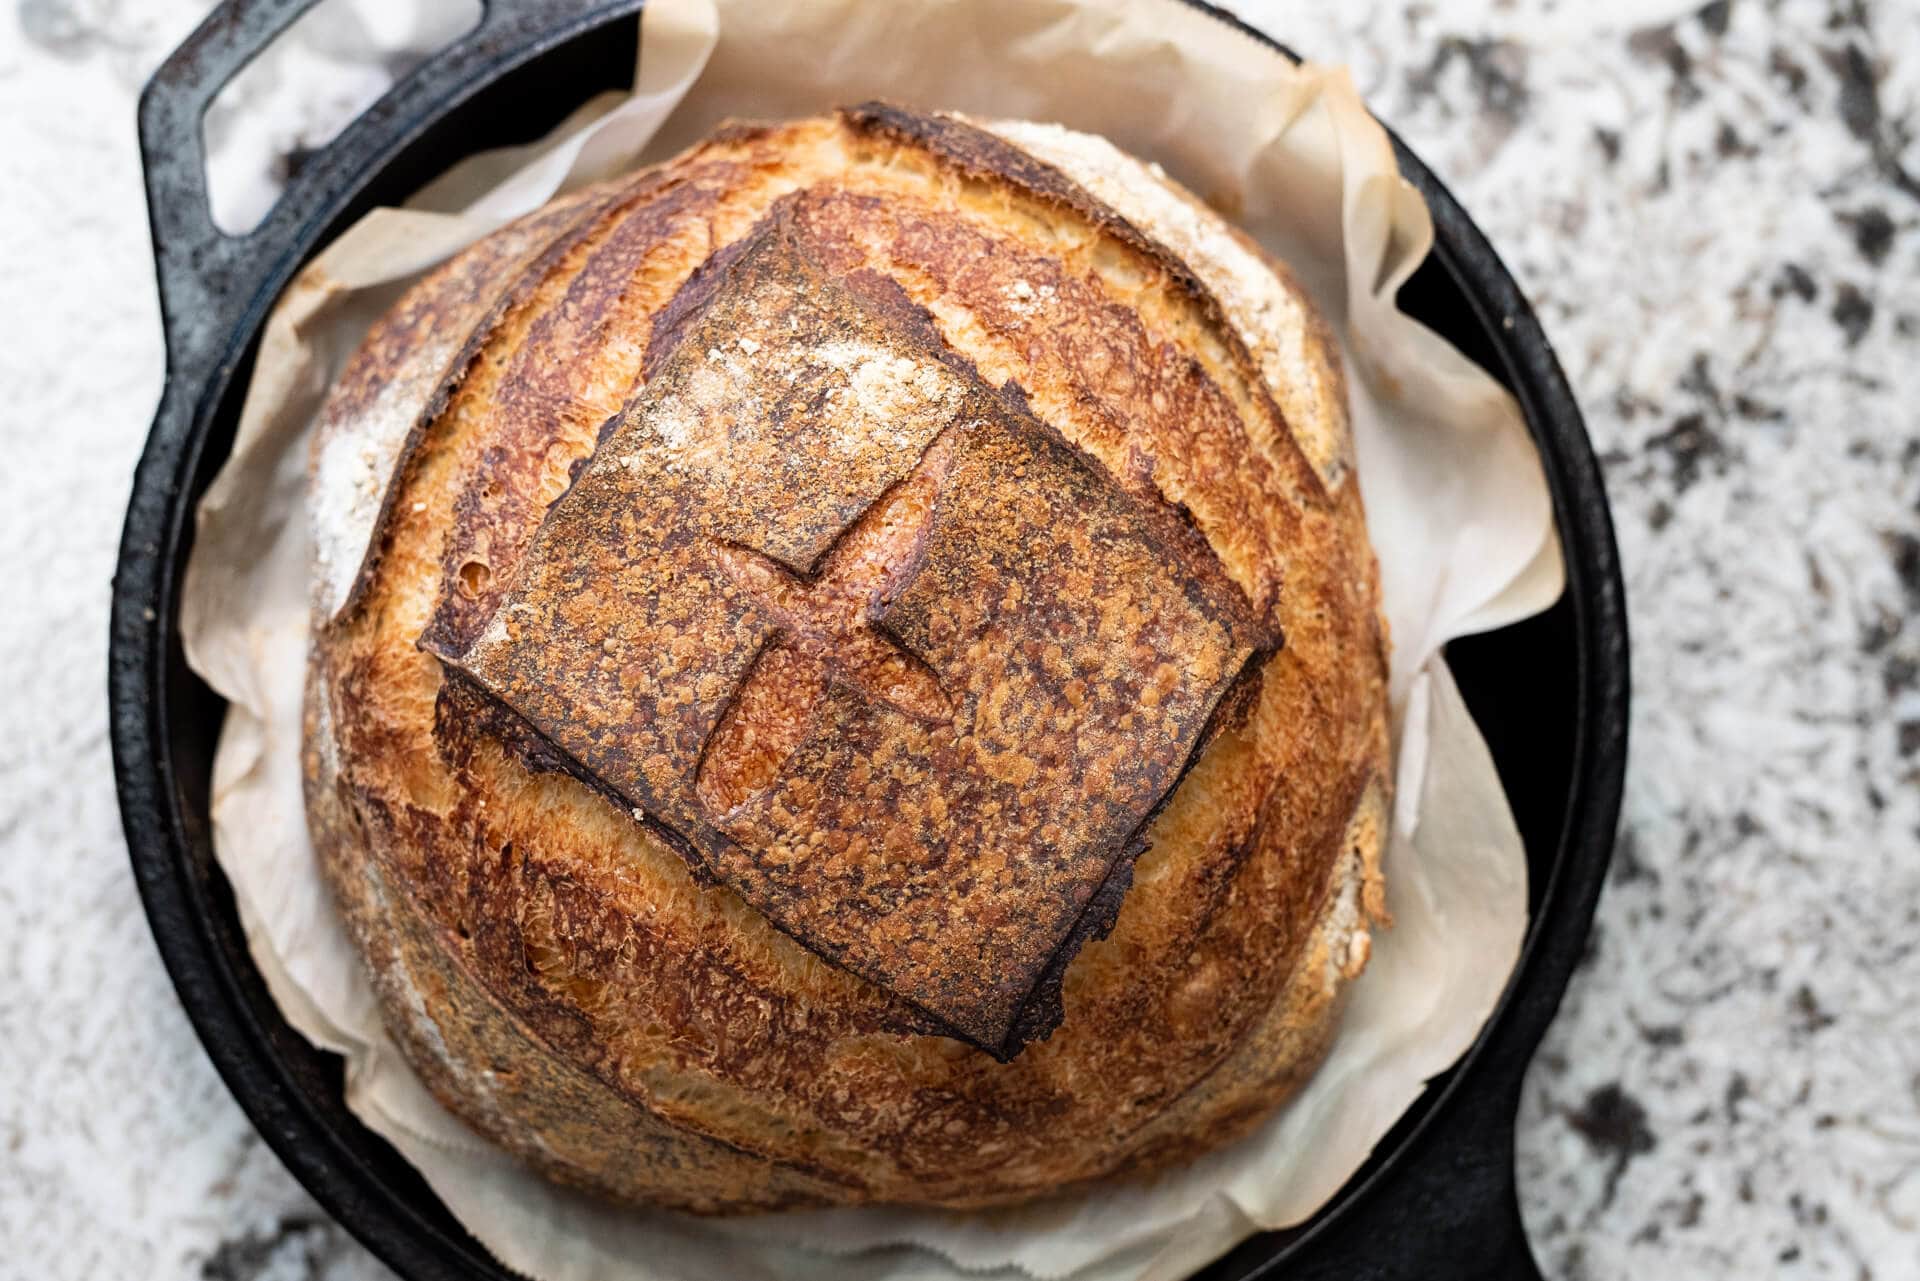 https://www.theperfectloaf.com/wp-content/uploads/2019/01/theperfectloaf-baking-bread-in-a-dutch-oven-feature-100.jpg